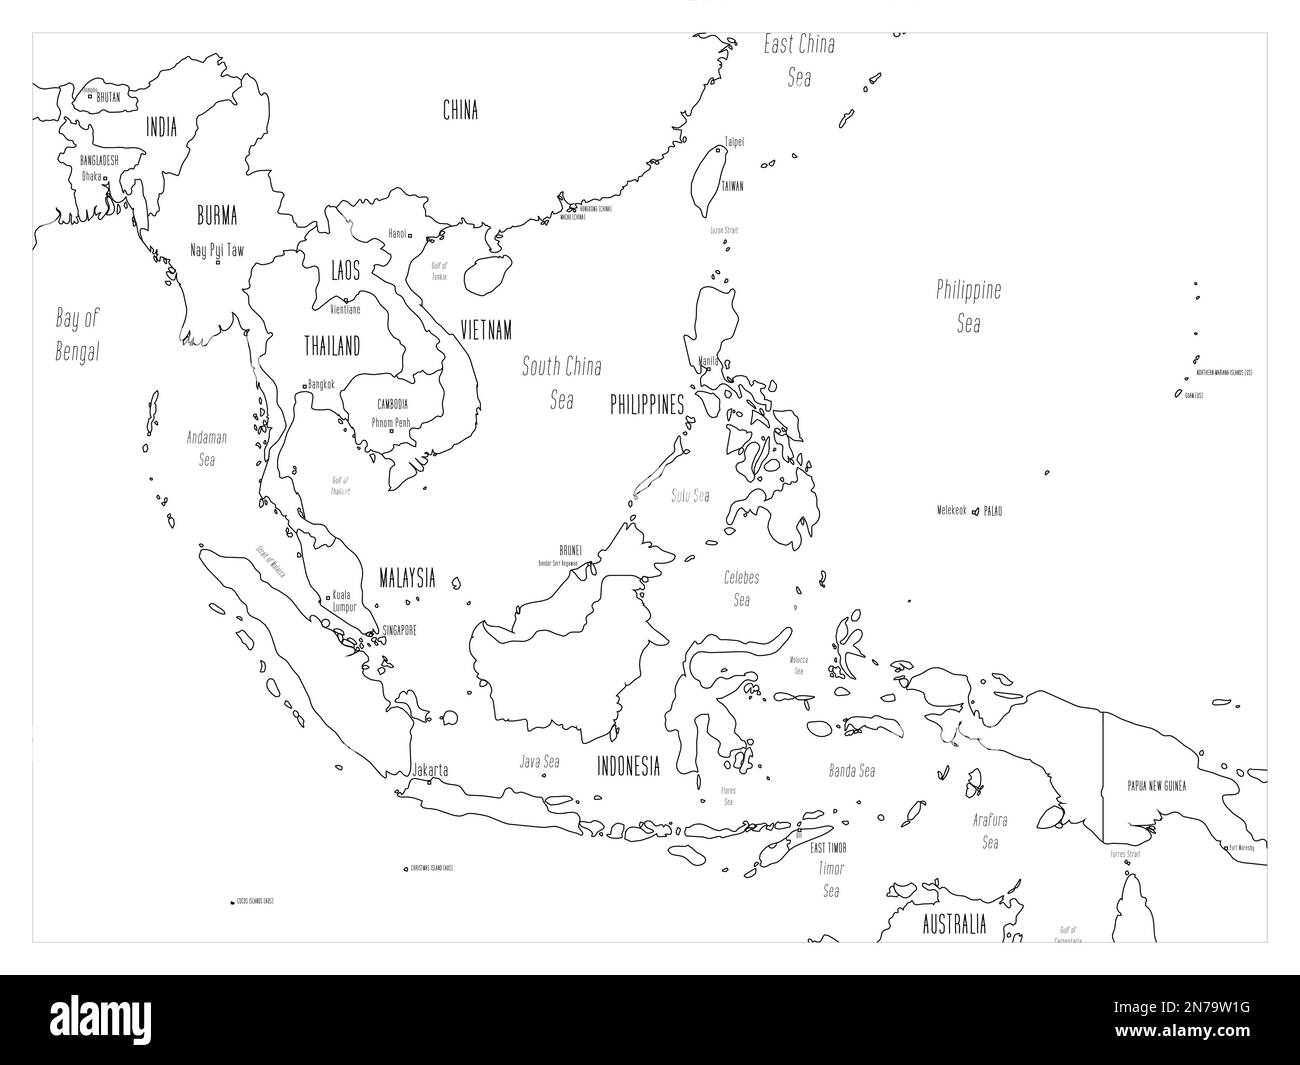 Political map of Southeast Asia. Black outline hand-drawn cartoon style illustrated map with bathymetry. Handwritten labels of country, capital city, sea and ocean names. Simple flat vector map. Stock Vector